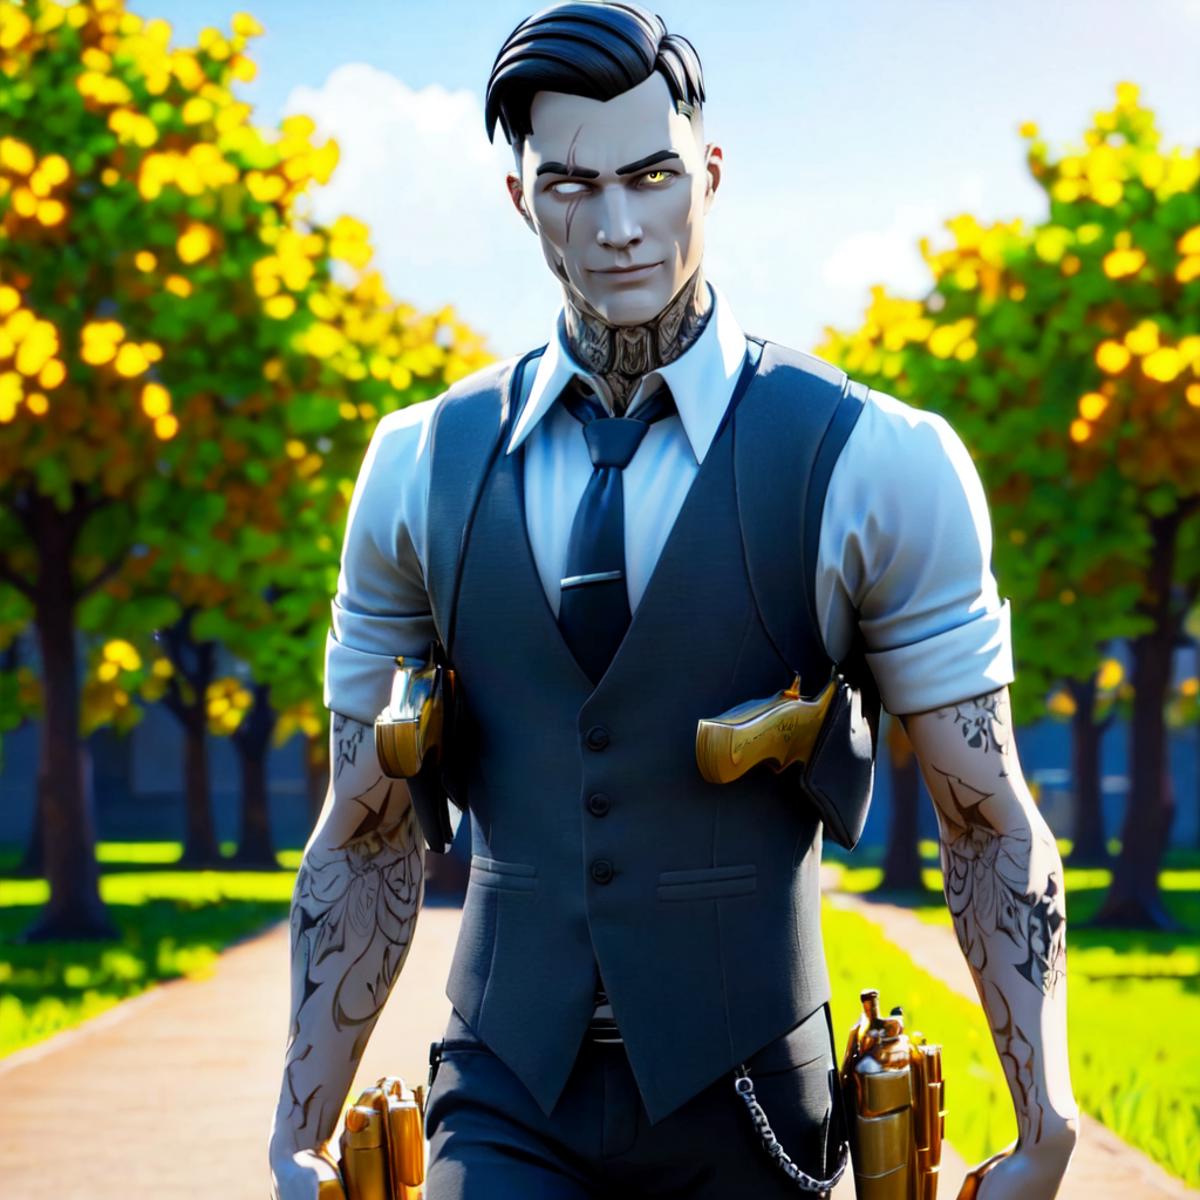 Midas from Fortnite image by Bloodysunkist